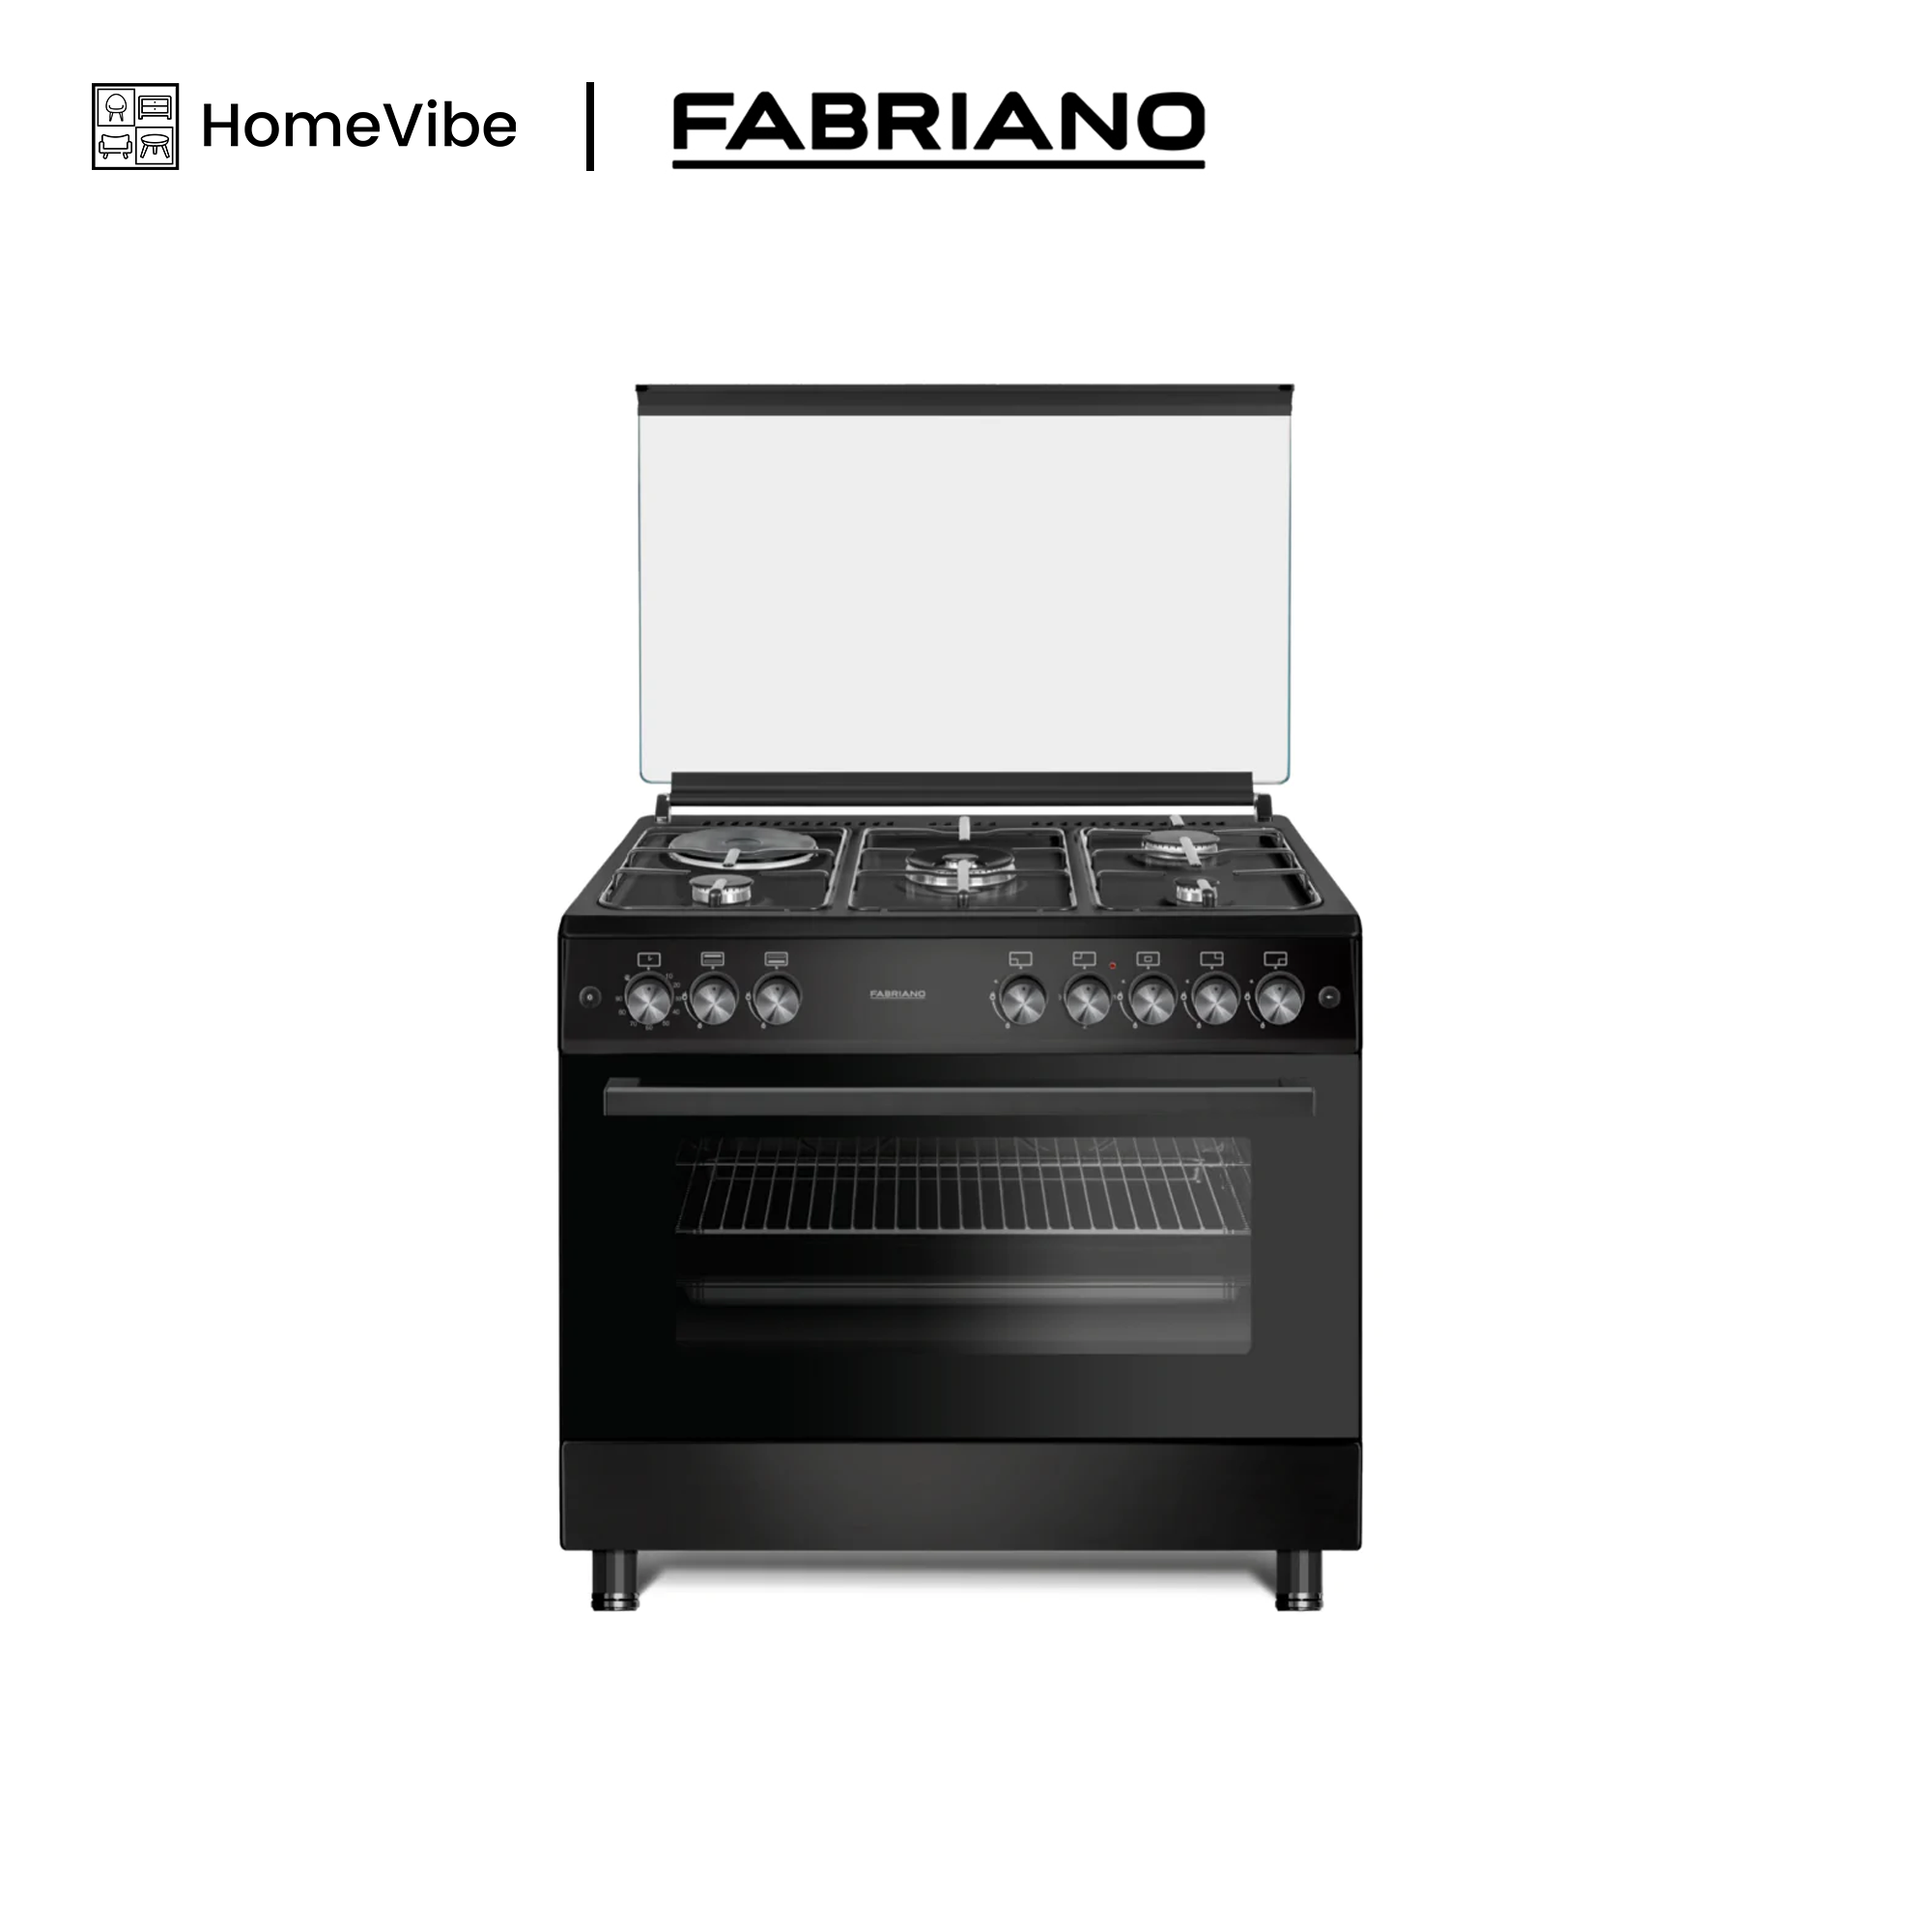 Fabriano 90cm, 4 Gas Burners (1 Dual Gas Burner) , 1 Electric plate + Gas Oven and Grill Free Standing Cooker F9L41G2-BL